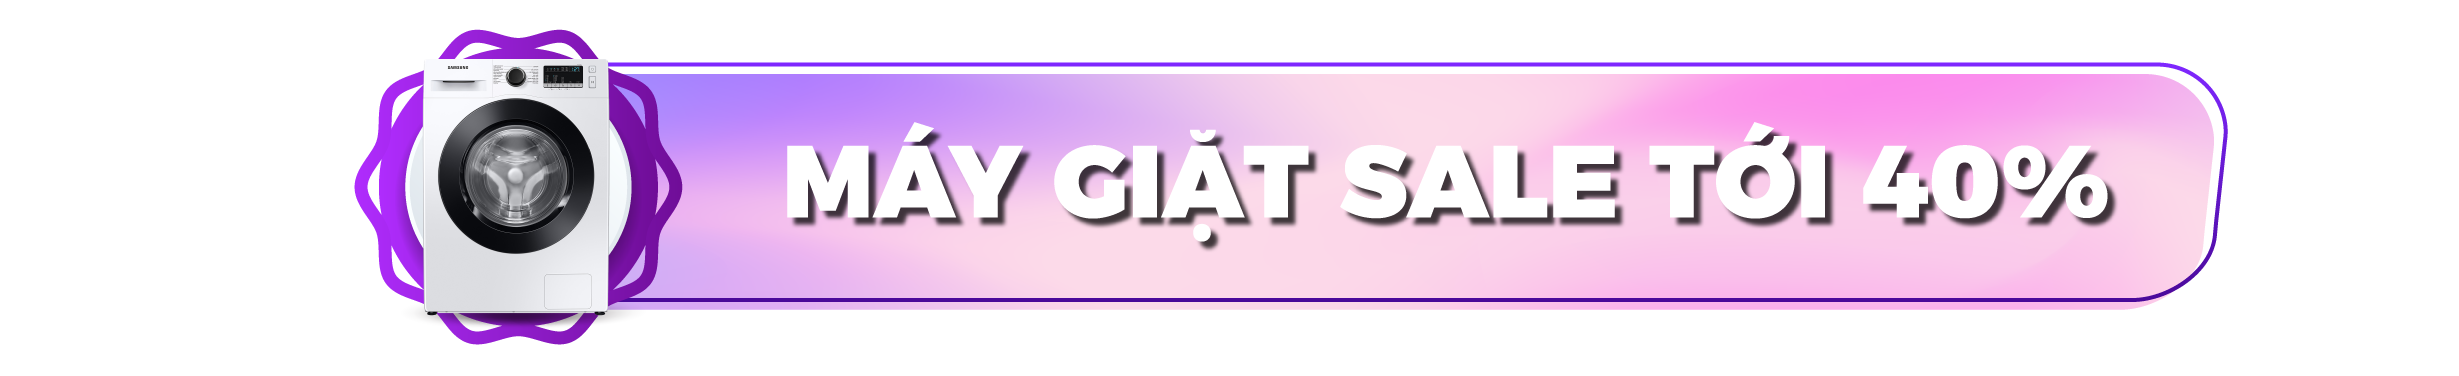 title-may-giat